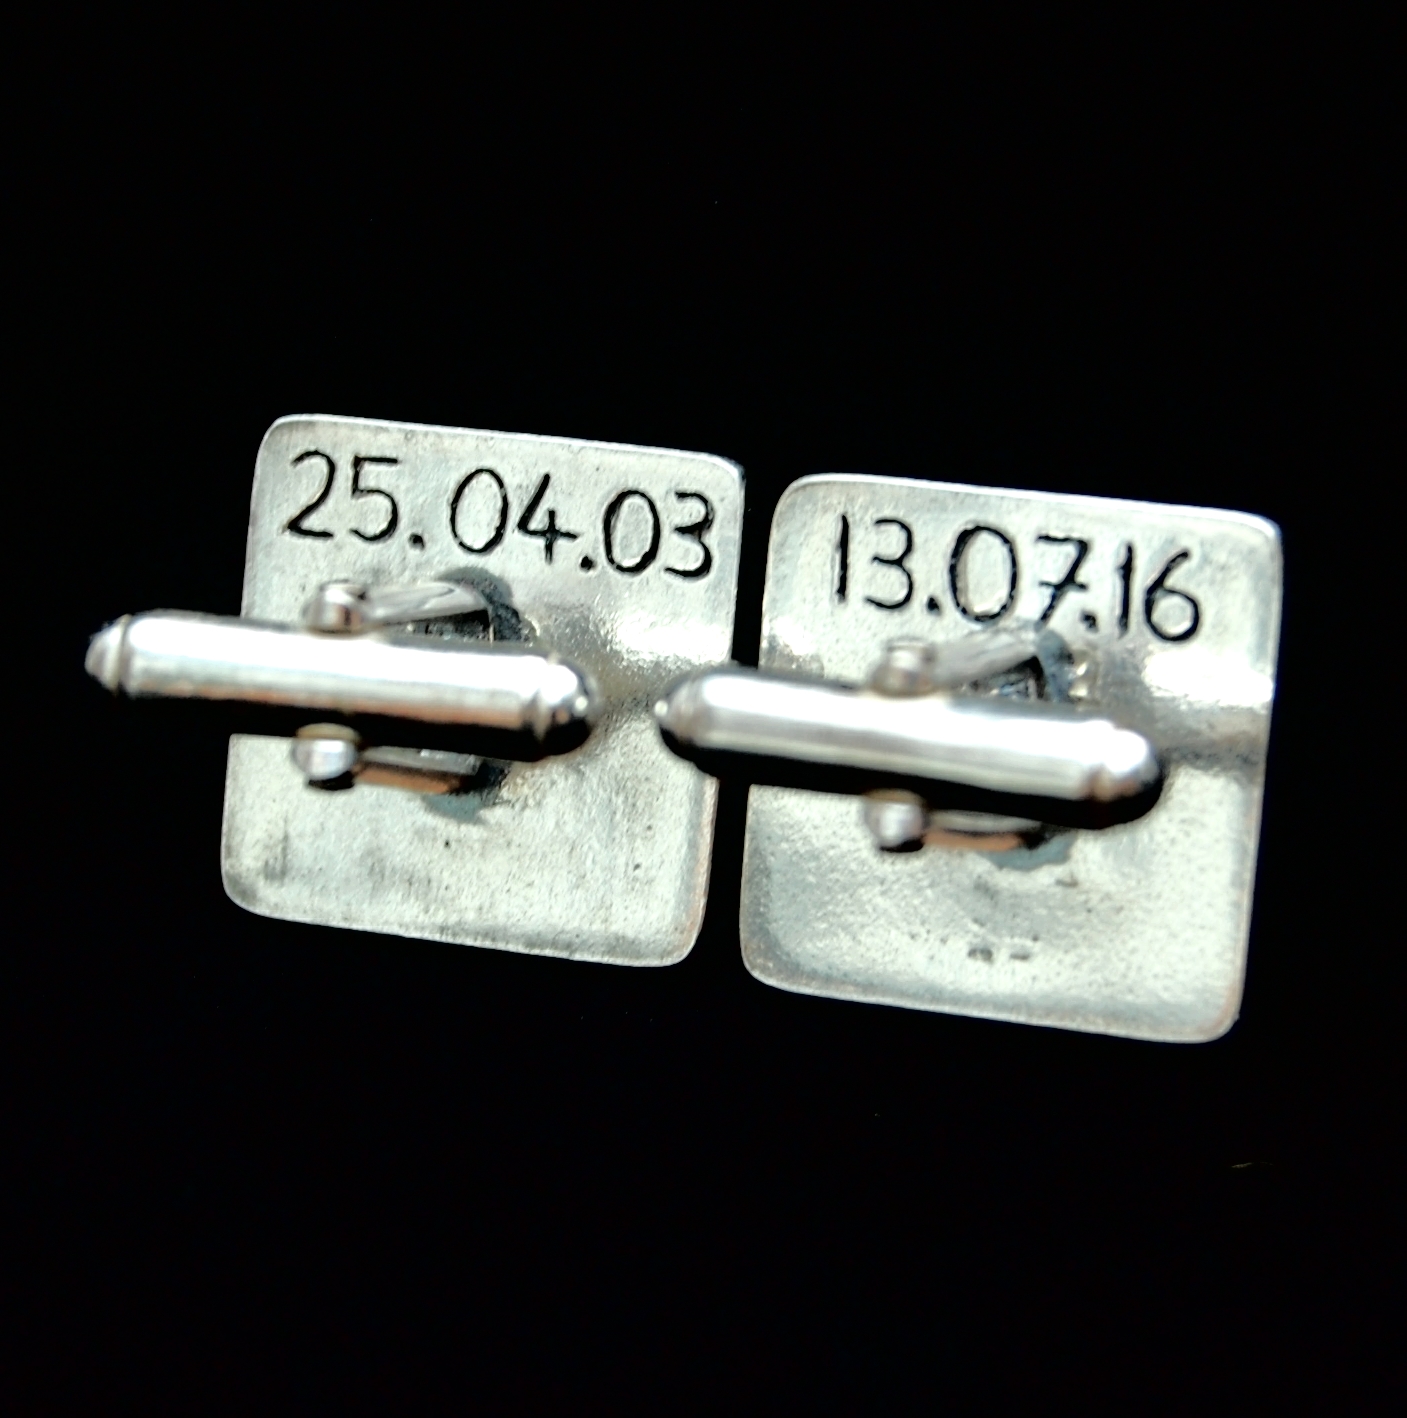 Capture your special dates on the back of your cufflinks.